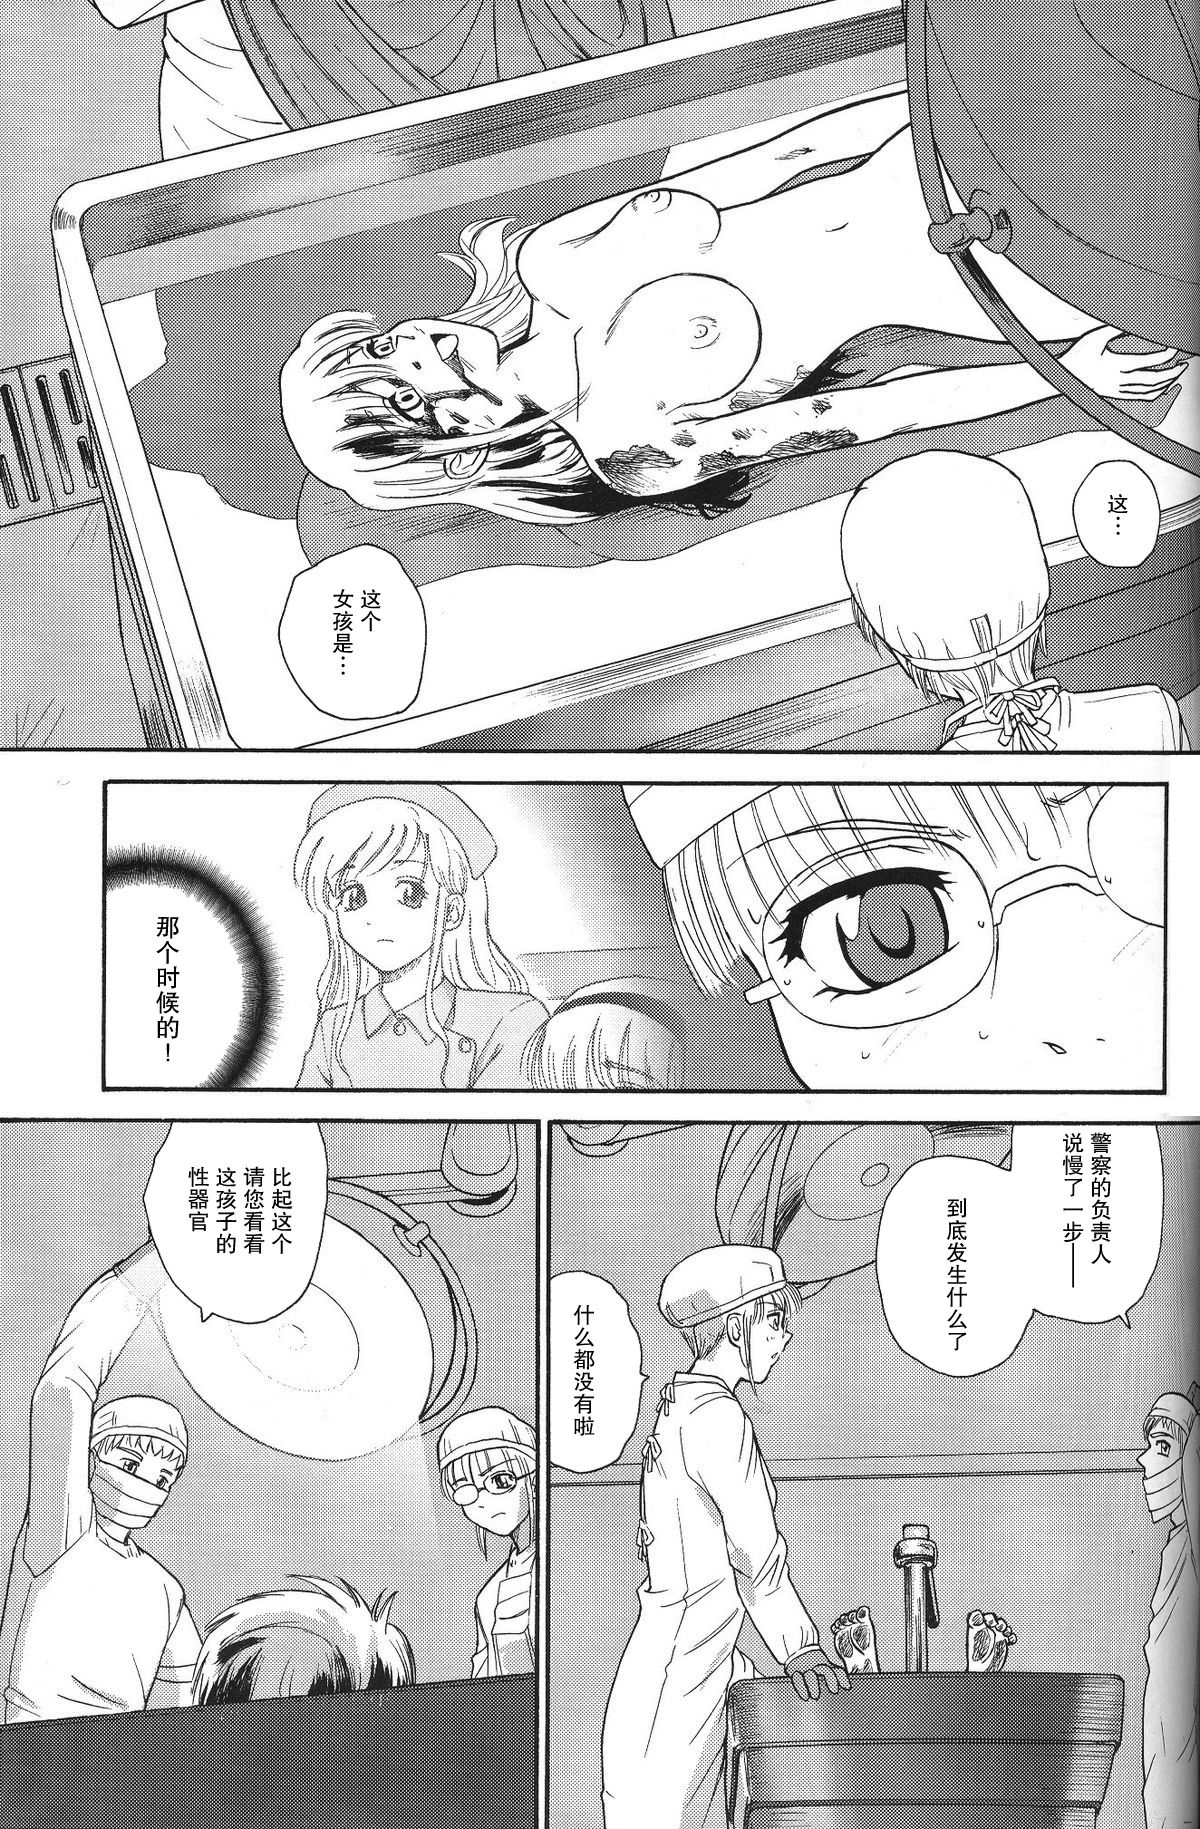 (C71) [Behind Moon (Q)] Dulce Report 8 | 达西报告 8 [Chinese] [哈尼喵汉化组] [Decensored] page 36 full